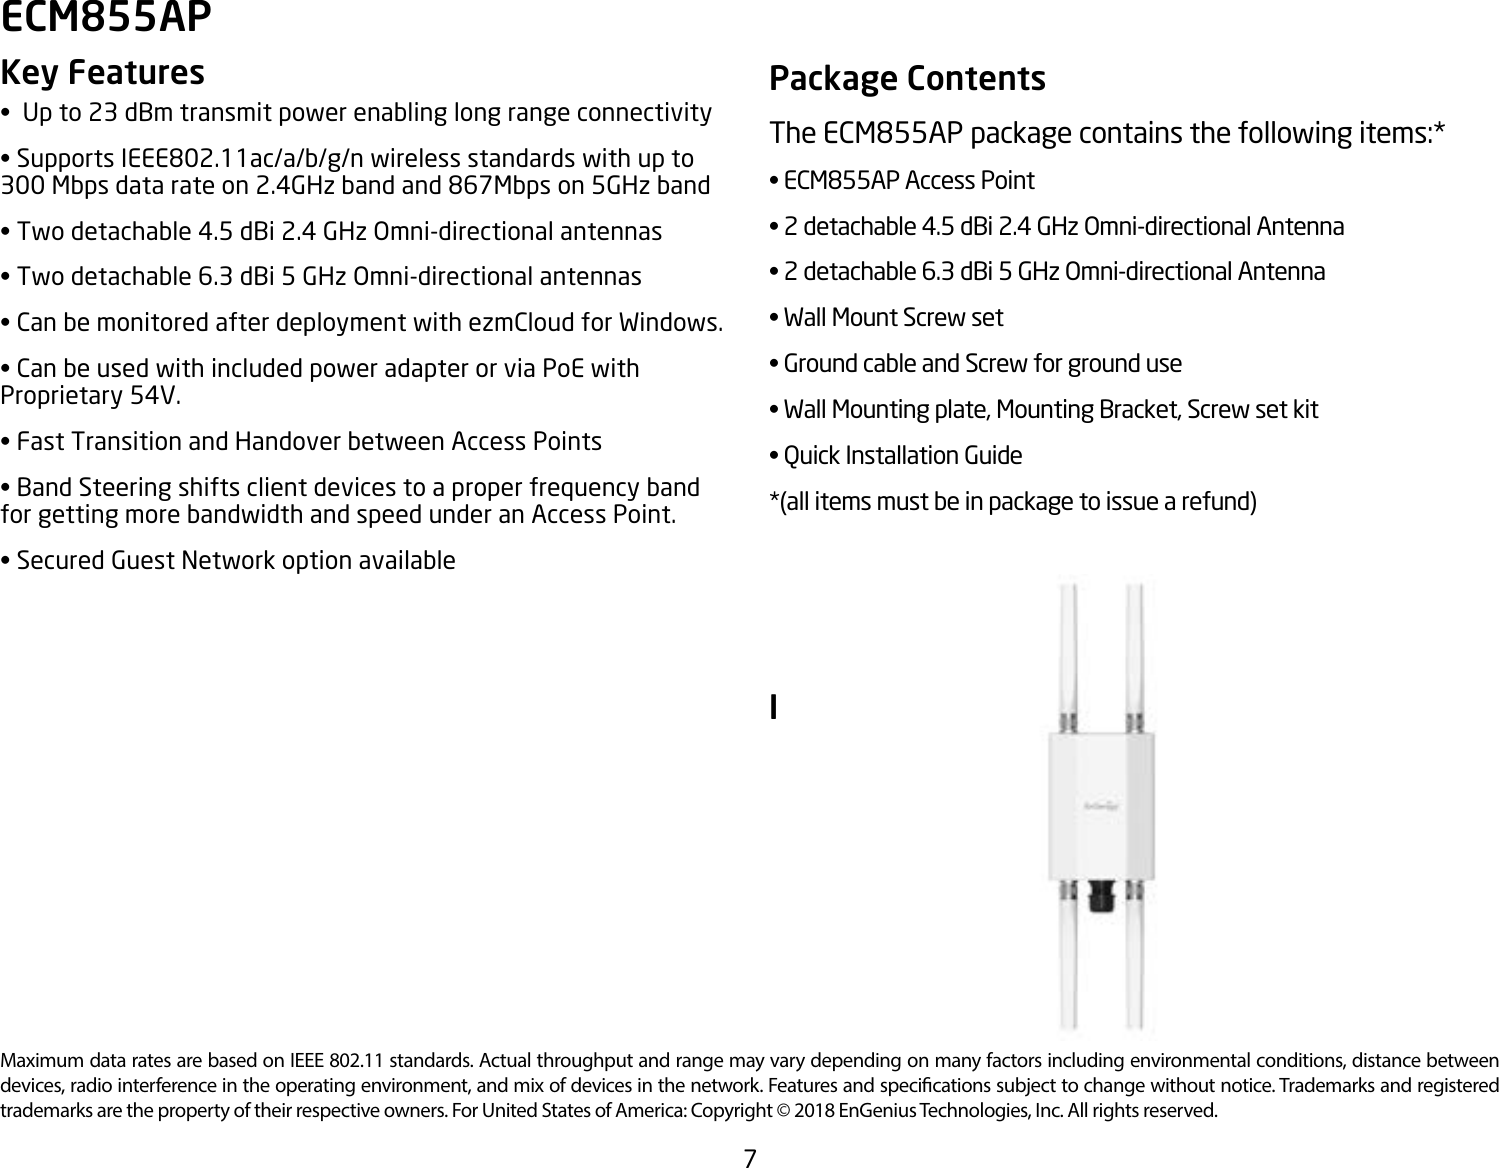 Page 7 of EnGenius Technologies ECM355AP AC1300 Indoor ceiling mount Managed Access Point User Manual User Manaul